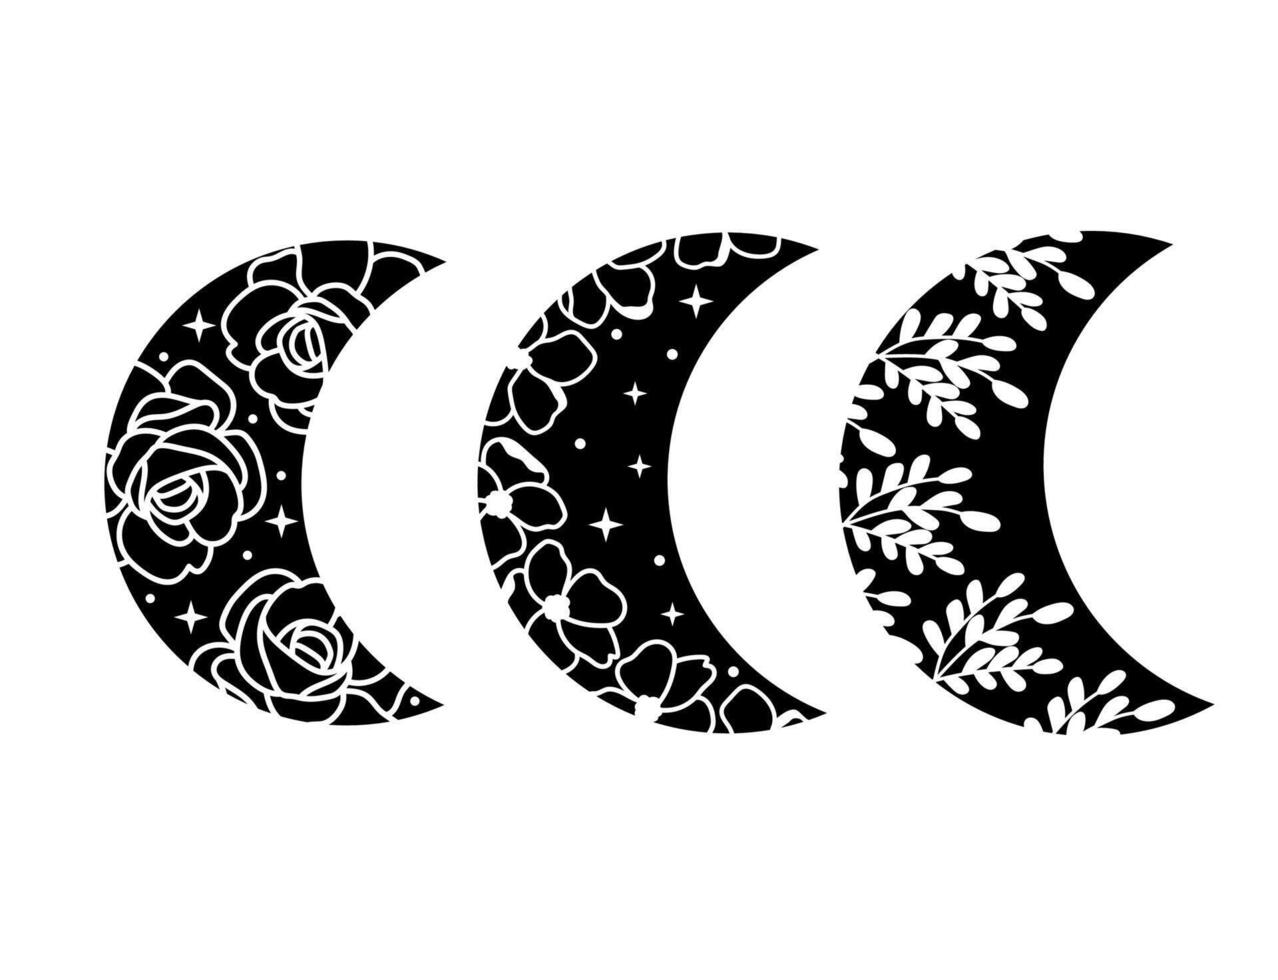 Celestial outline crescent moon with flowers and stars vector